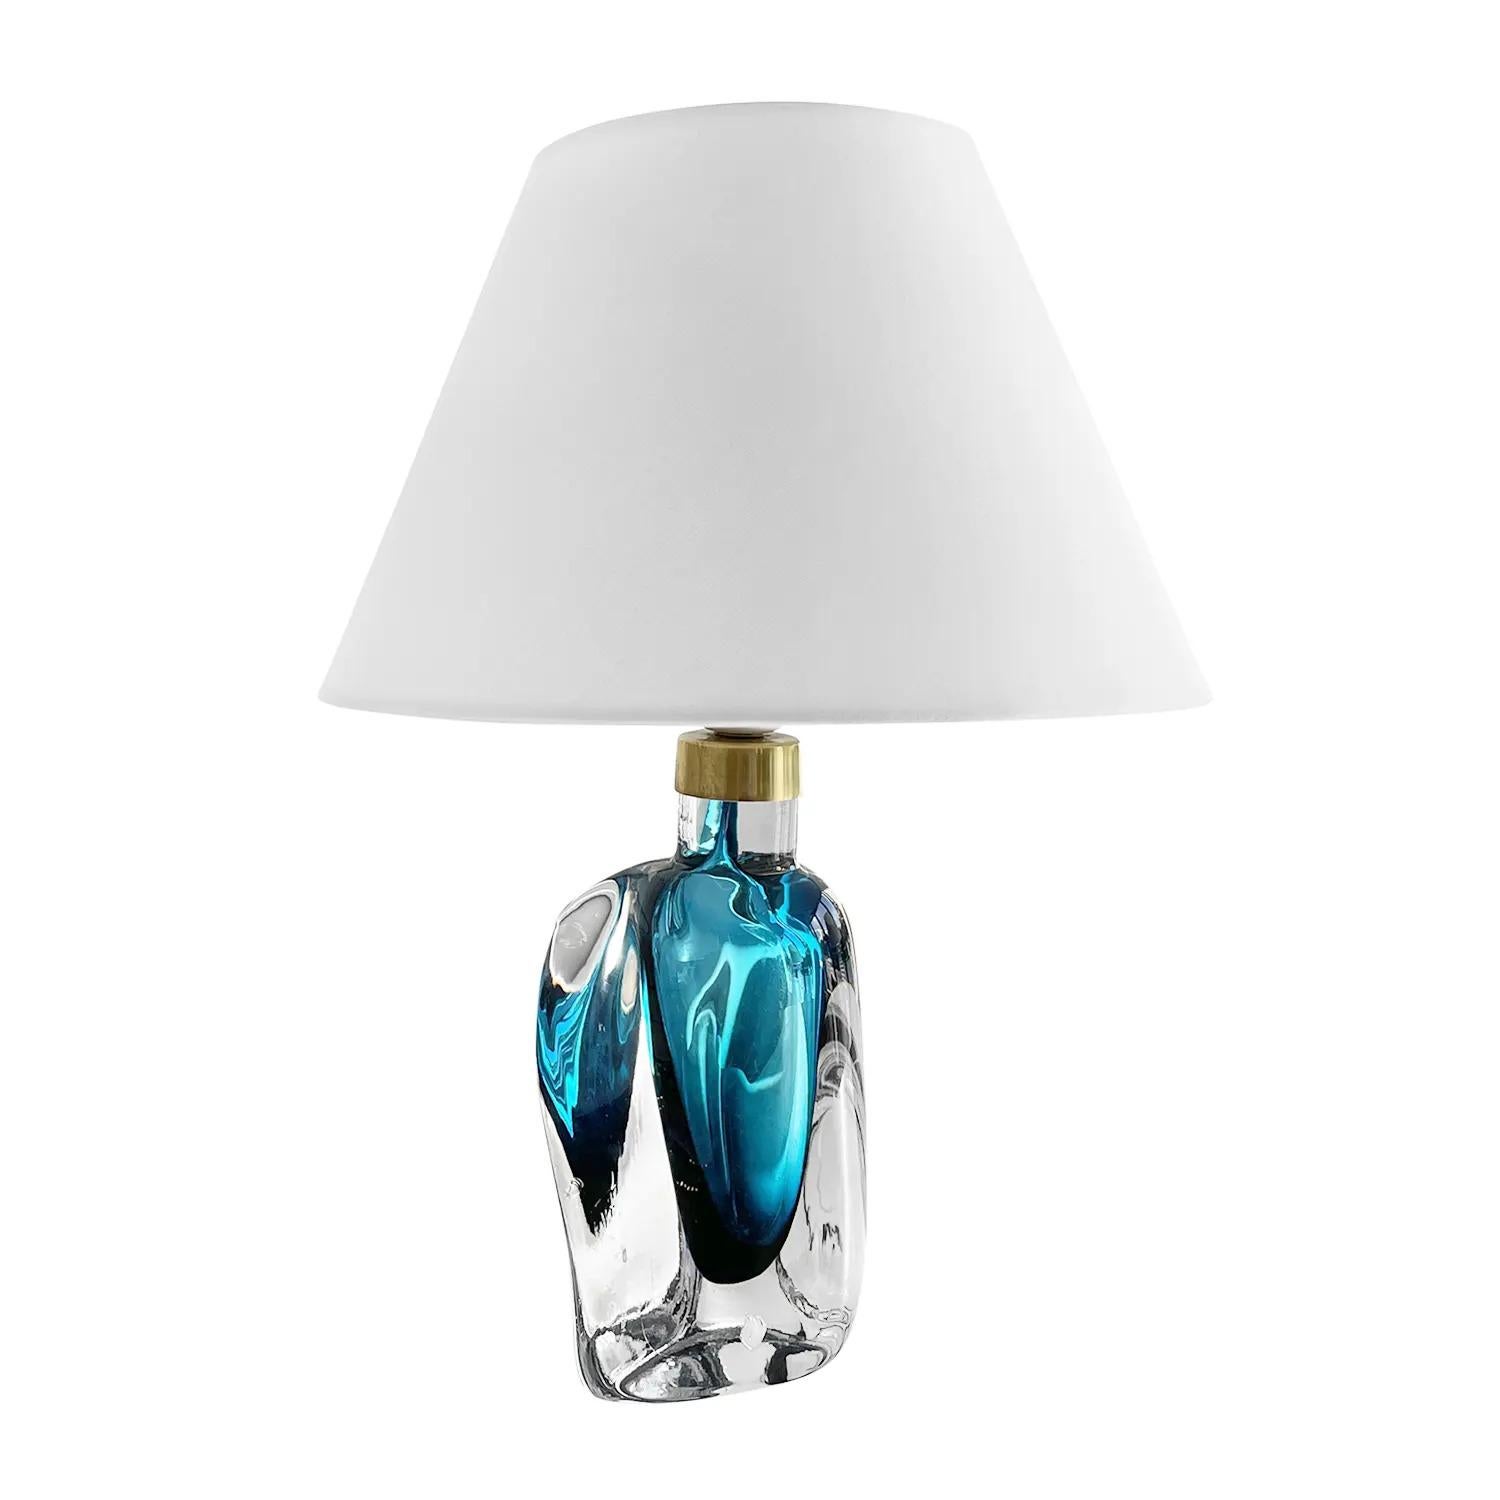 A dark-blue, vintage Mid-Century modern Swedish table lamp made of hand blown smoked Murano glass, the beam is enhanced with a polished brass ring, in good condition. The sculptural Scandinavian desk light was produced by Orrefors, composed with a